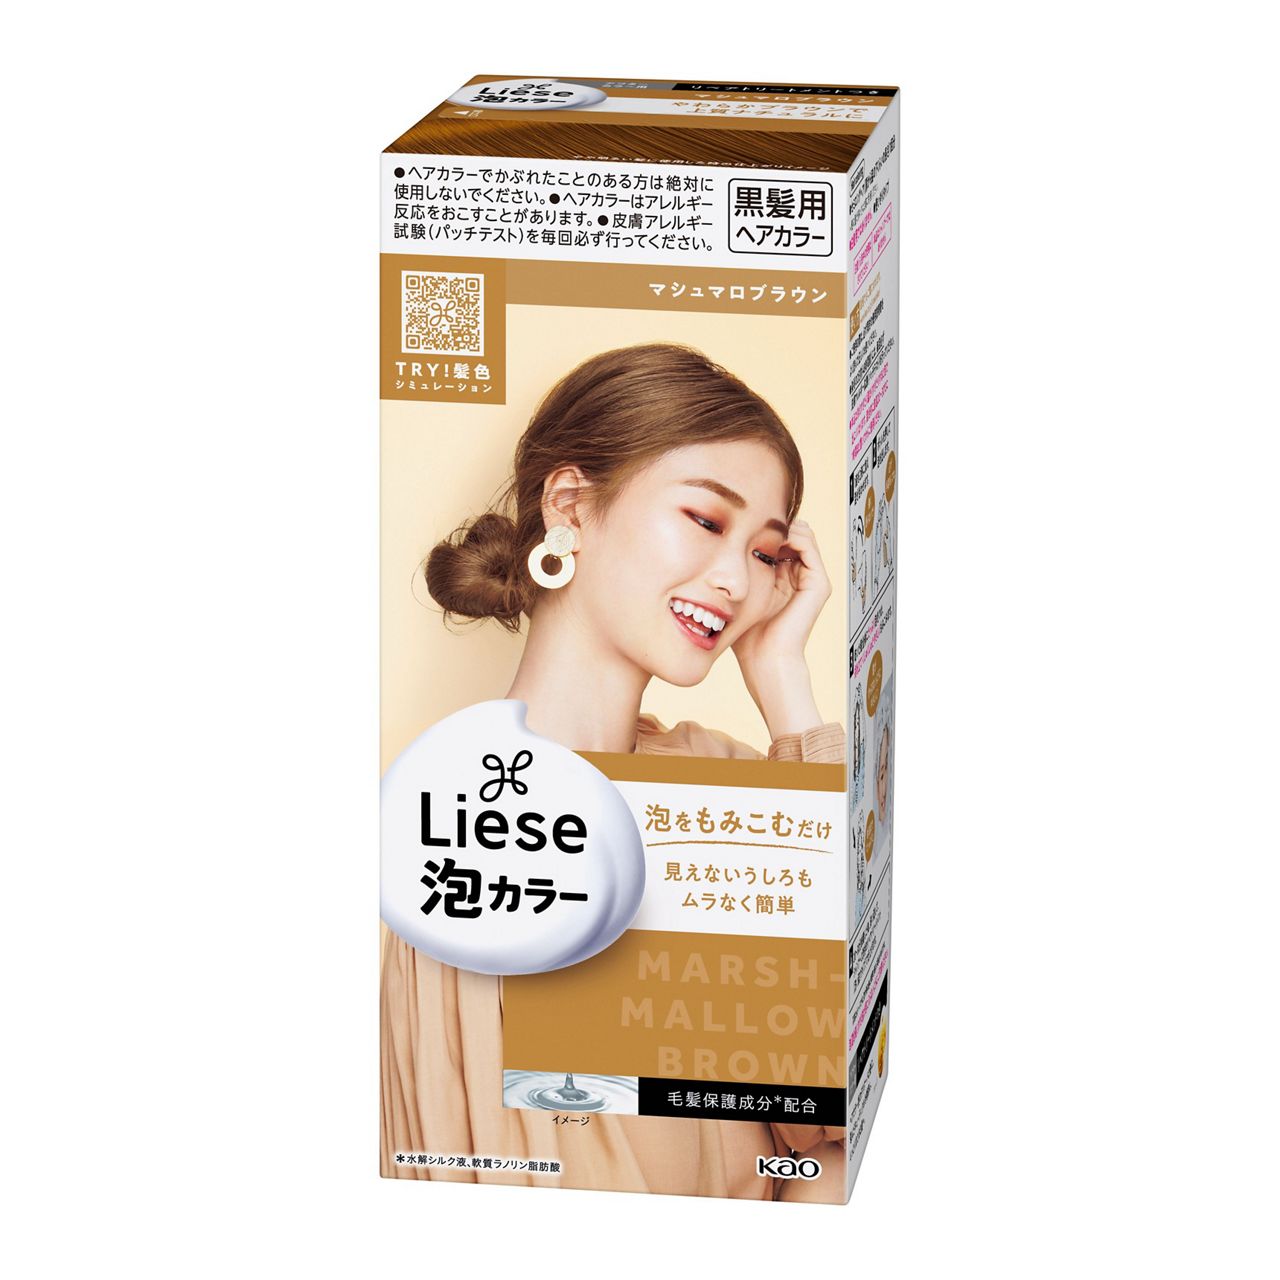 Liese Kao Bubble Hair Color Prettia - Marshmallow Brown - Harajuku Culture Japan - Japanease Products Store Beauty and Stationery